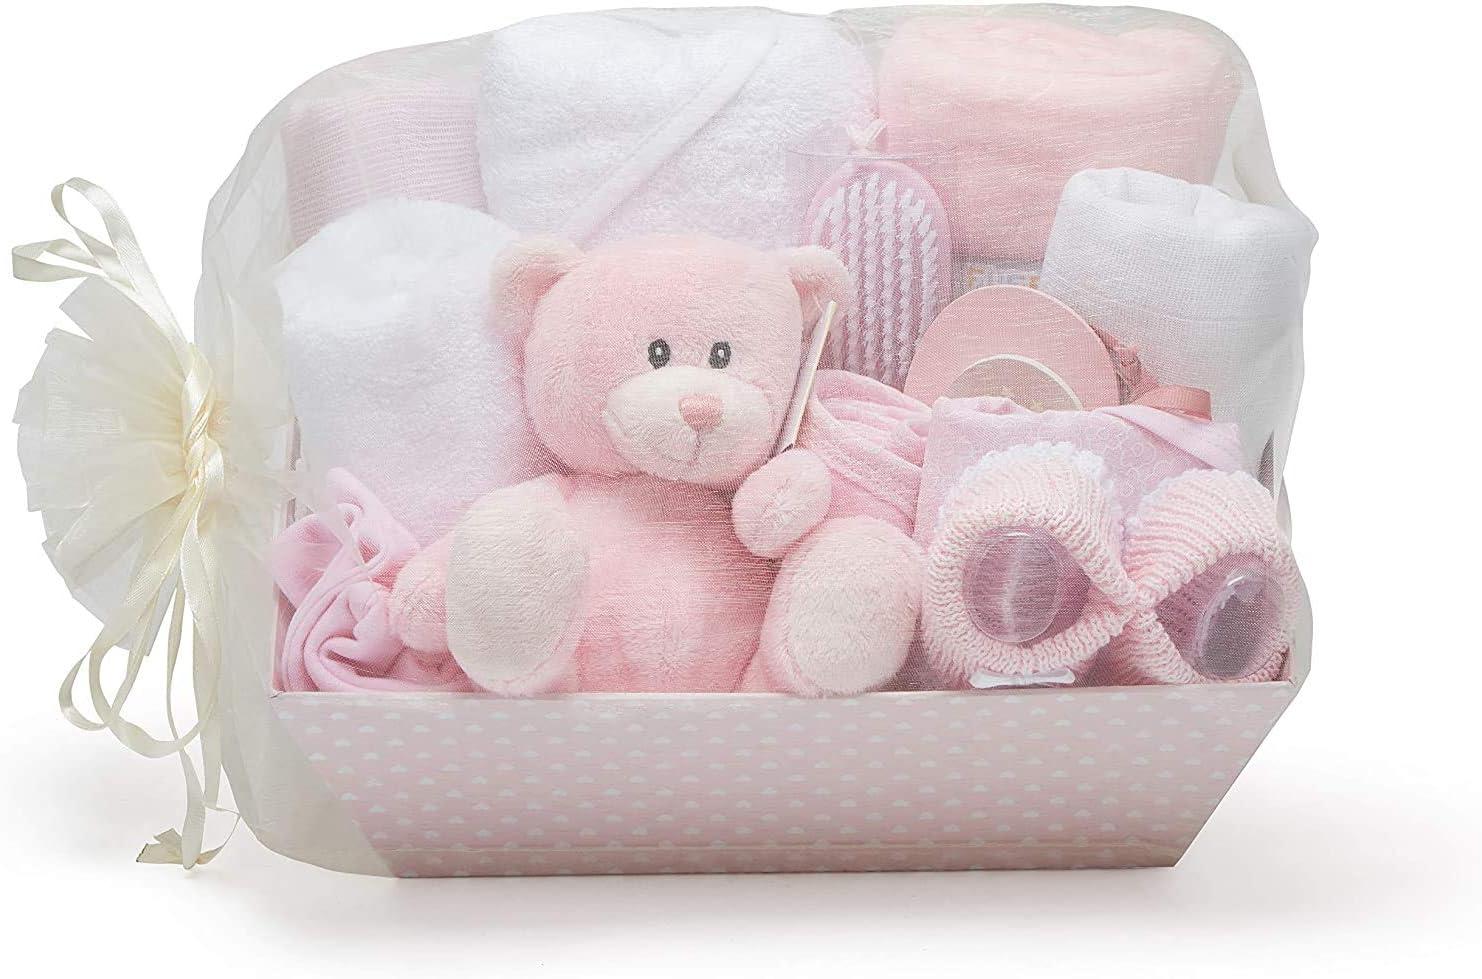 Baby Girl Gift Basket, Expectant Parents Gift, Unique Baby Shower Gift,  Newborn Congratulations, Pregnancy Announcement, Corporate Client - Etsy